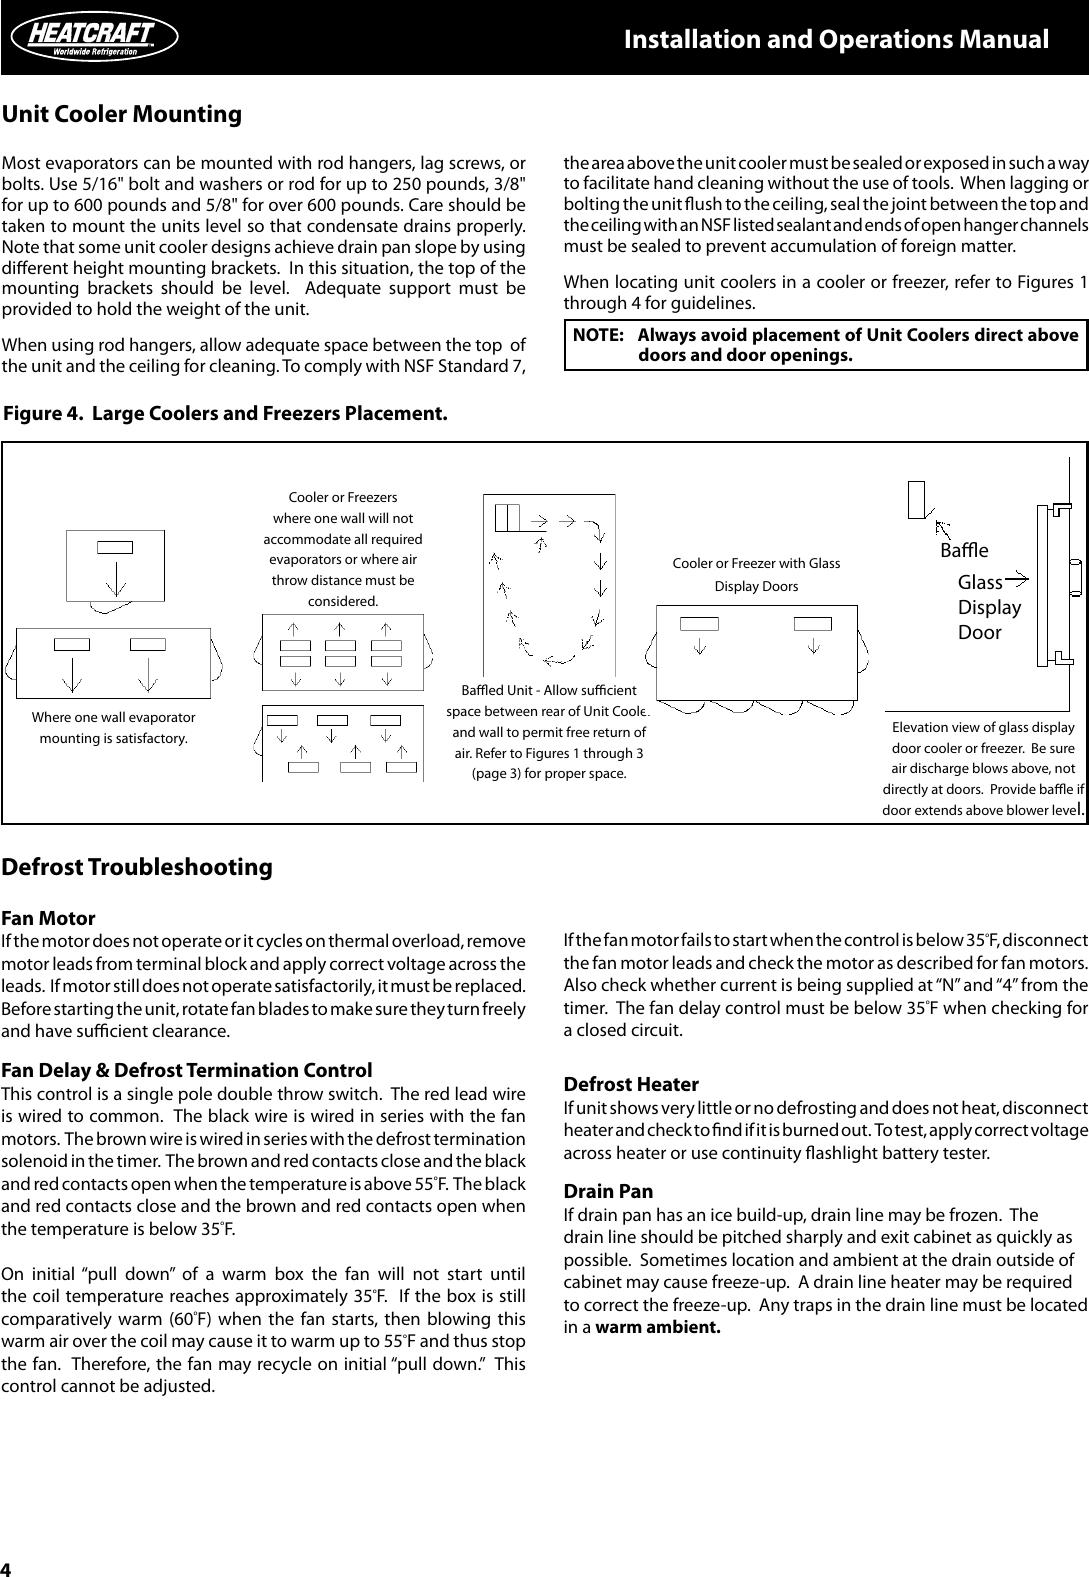 Page 4 of 8 - Heatcraft-Refrigeration-Products Heatcraft-Refrigeration-Products-Unit-Coolers-H-Im-Uc-Users-Manual-  Heatcraft-refrigeration-products-unit-coolers-h-im-uc-users-manual